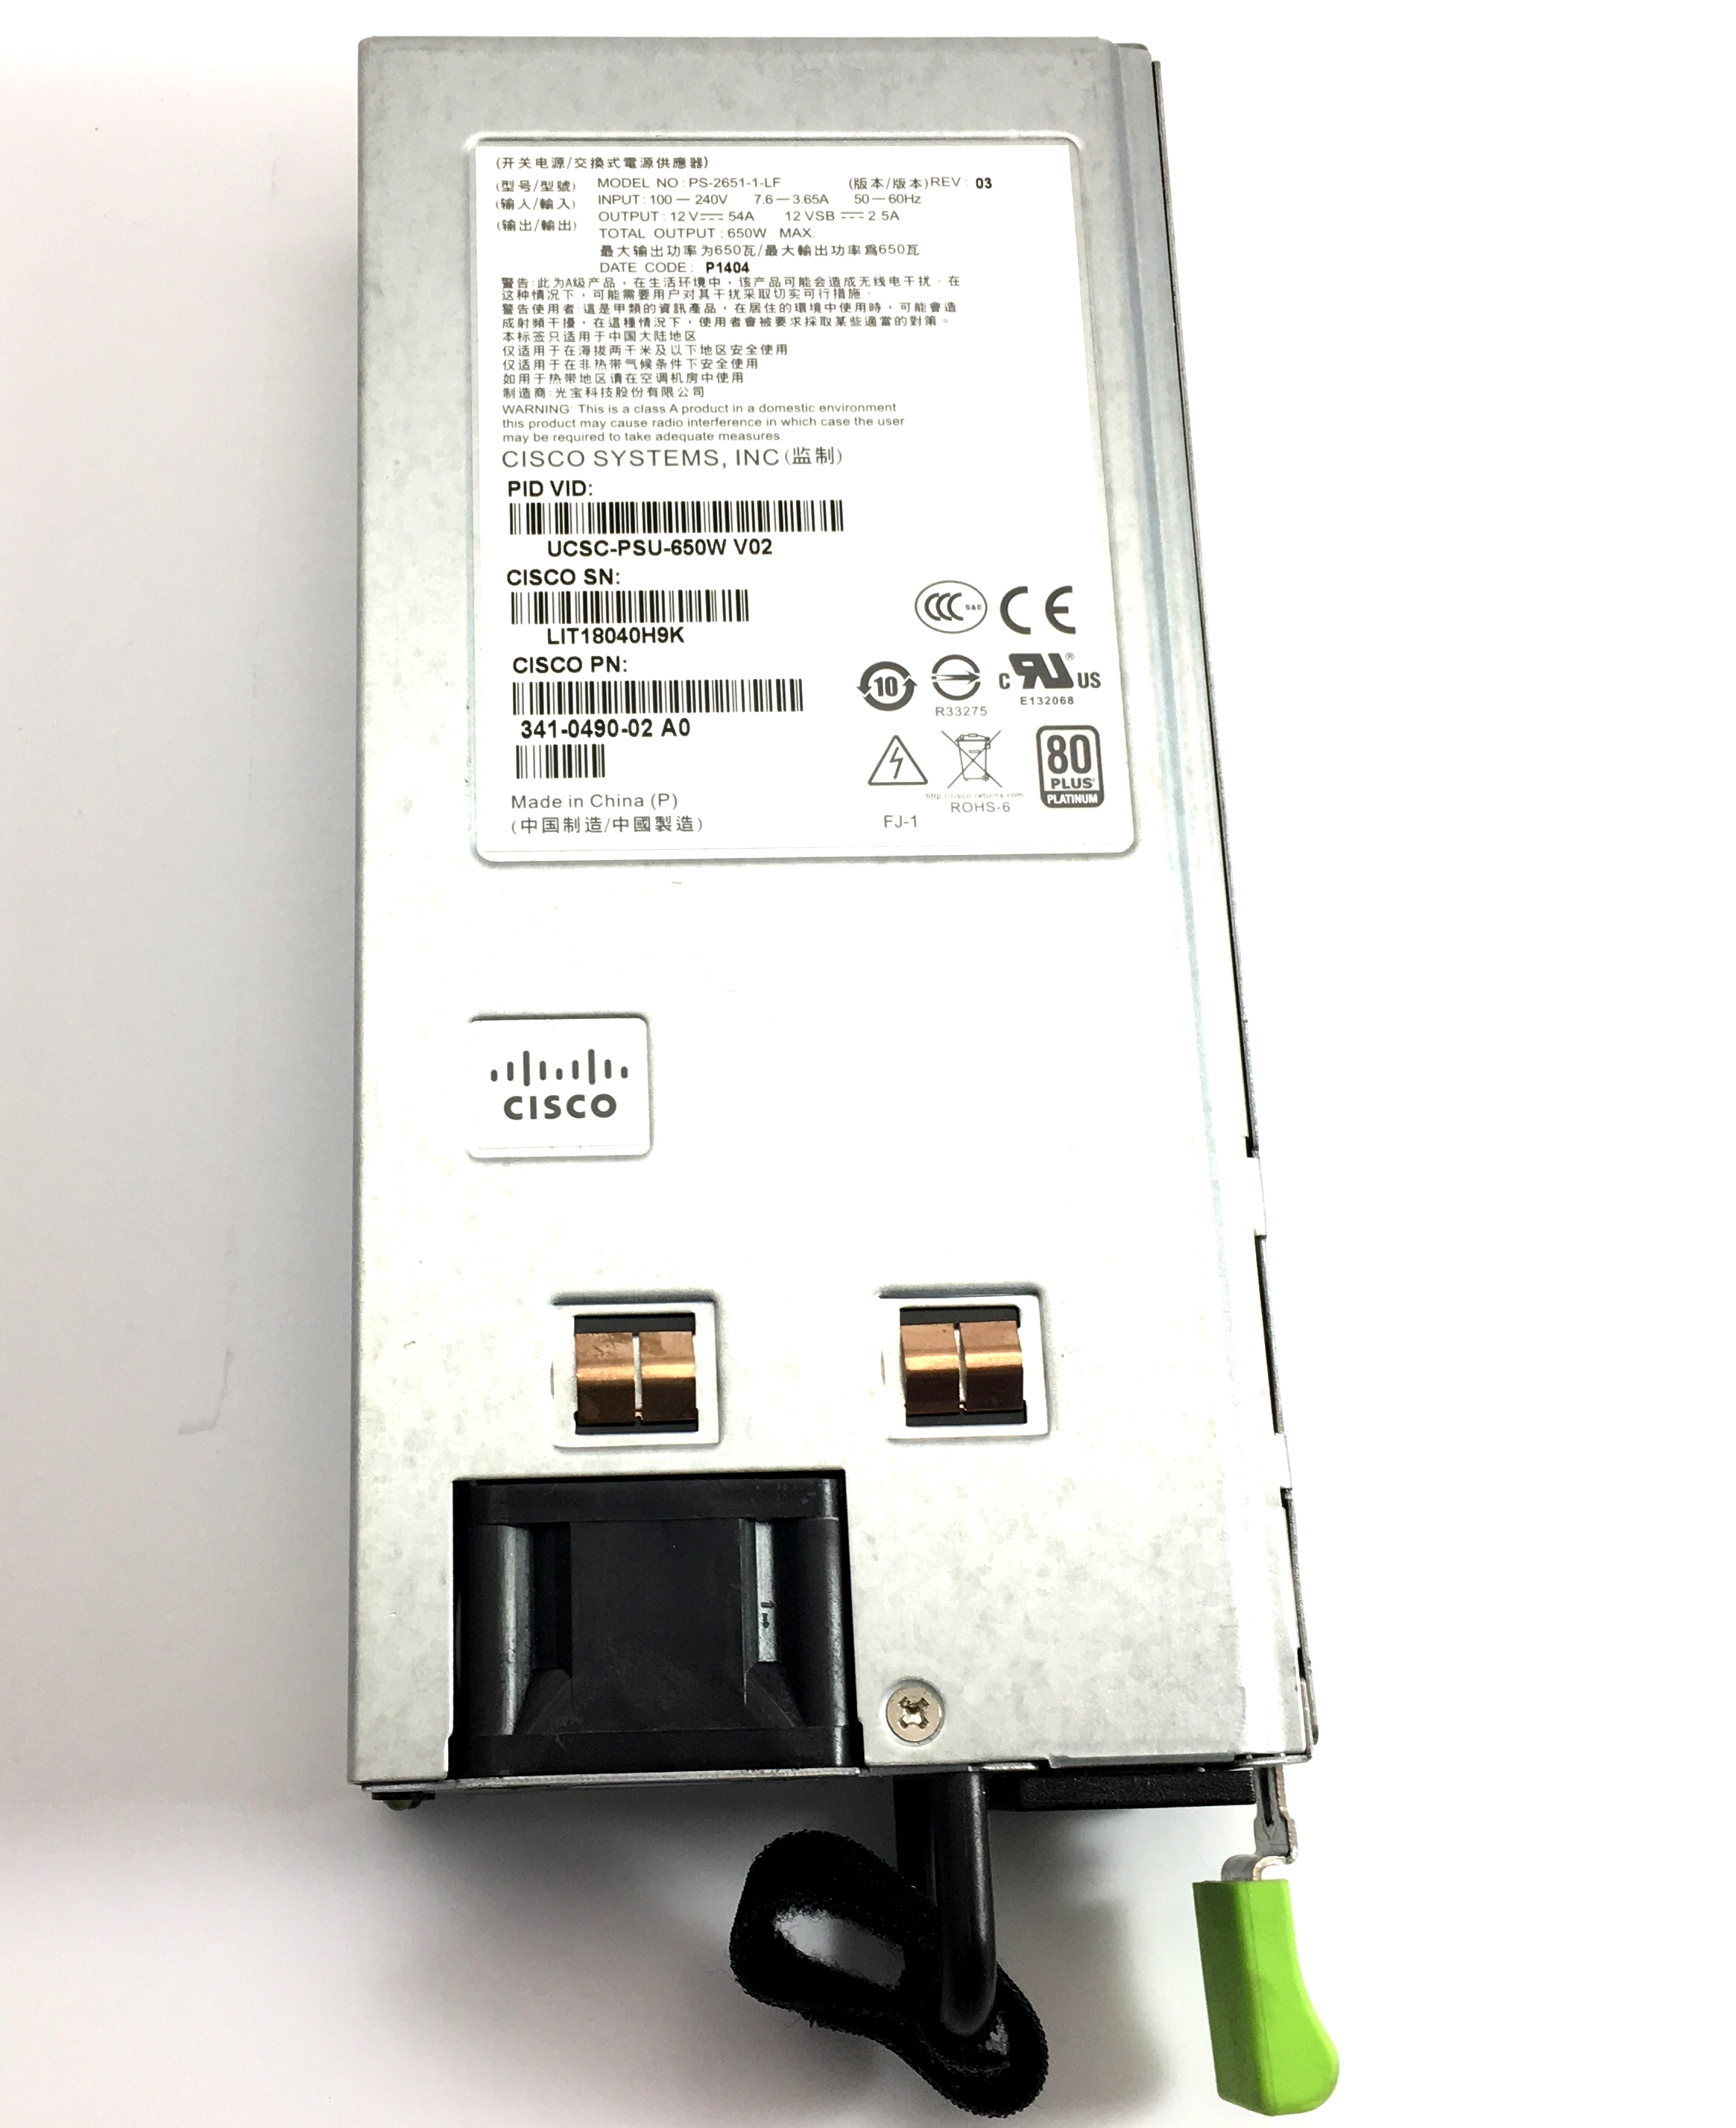 Details about   1pc used   Clsco UCSC-PSU-650W V02 341-0490-02 PS-2651-1-LF  #TT2 